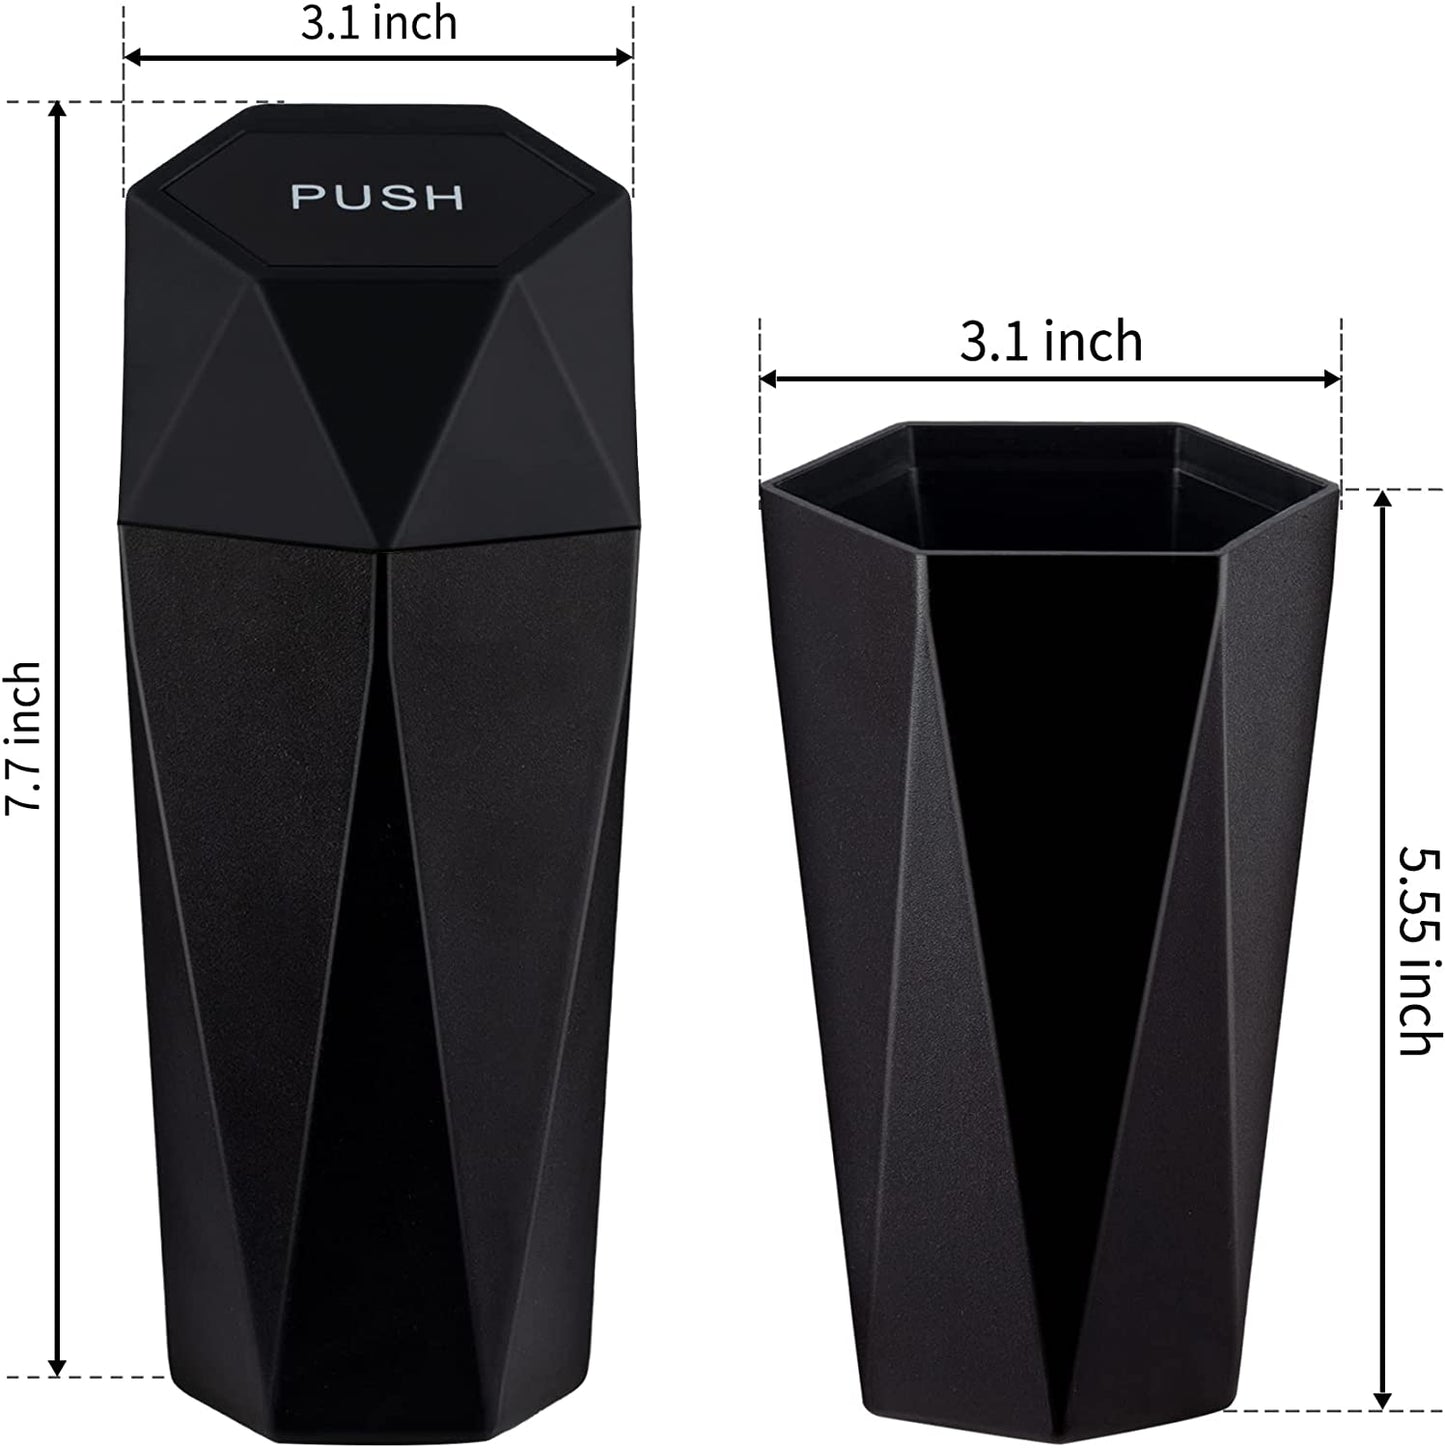 Car Trash Can with Lid, Diamond Design Small Automatic Portable Trash Can, Easy to Clean, Used in Car Home Office (Black)